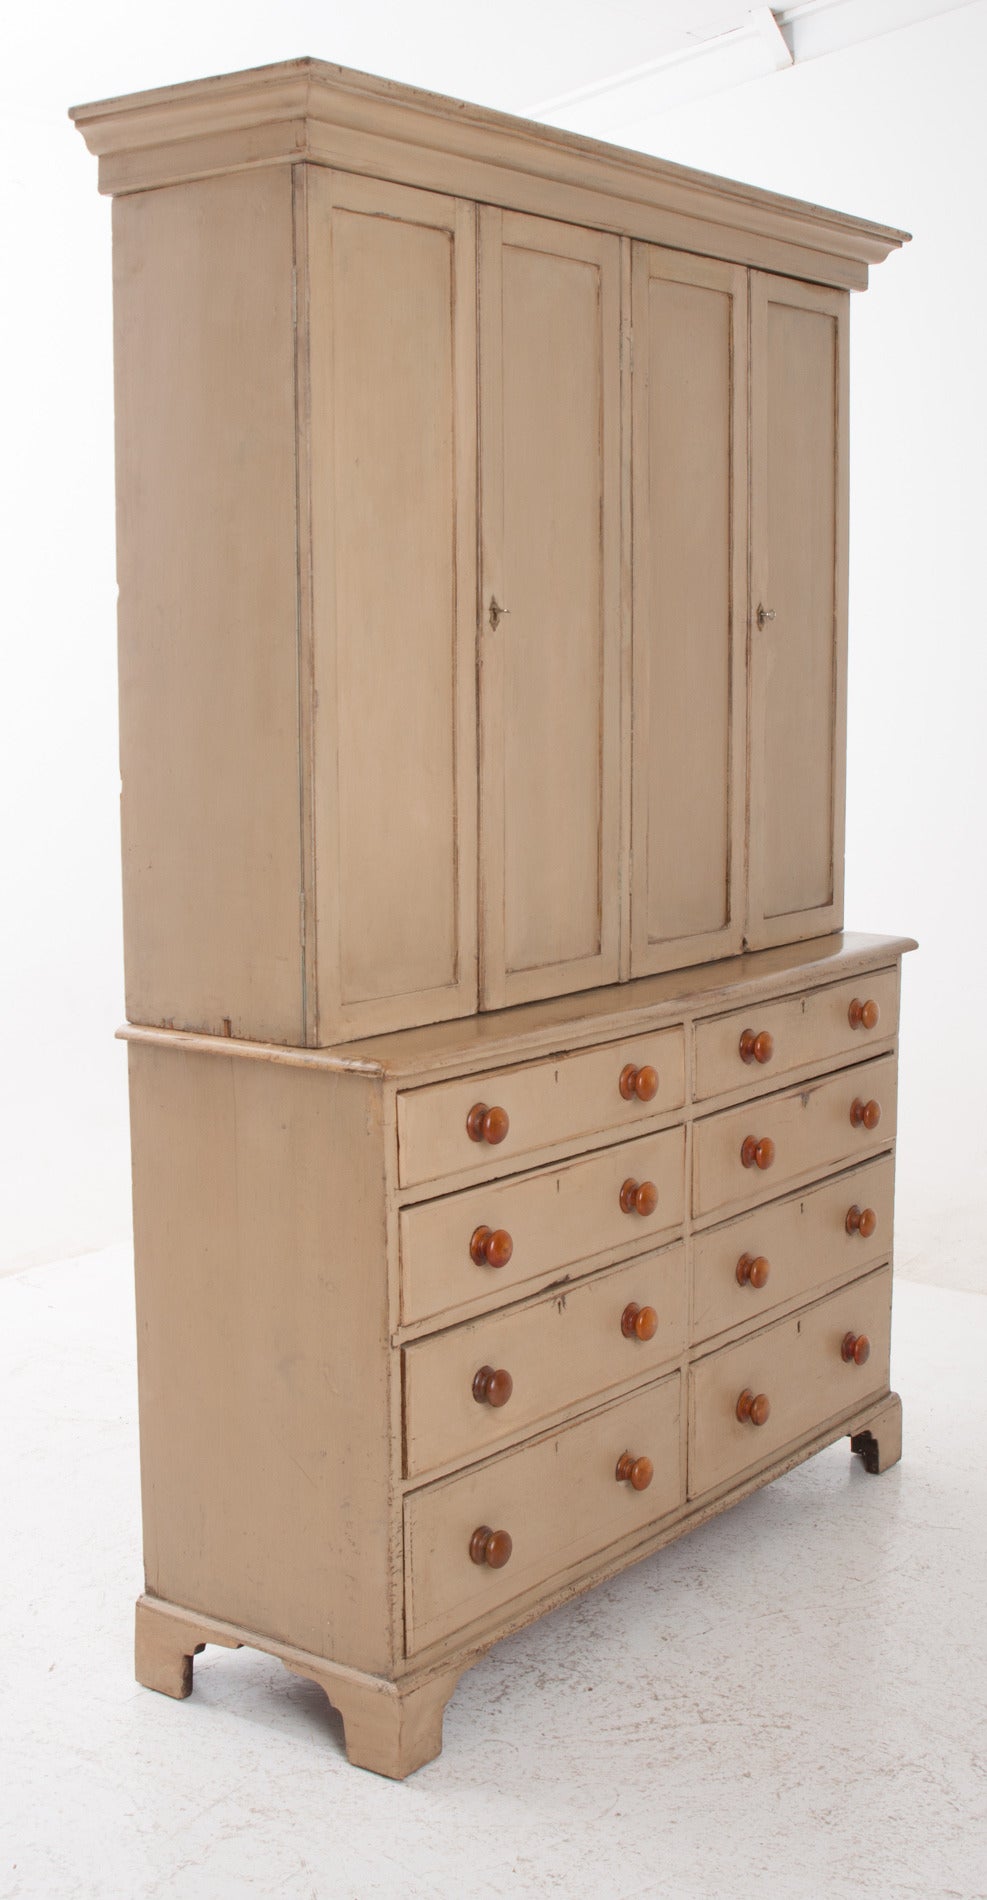 A fabulous painted pine butler's pantry would have felt right at home in Downton Abbey. The yellow paint is original to the piece and has rich patina; the interior of the top cupboard is a beautiful turquoise. Below are eight drawers all with wood